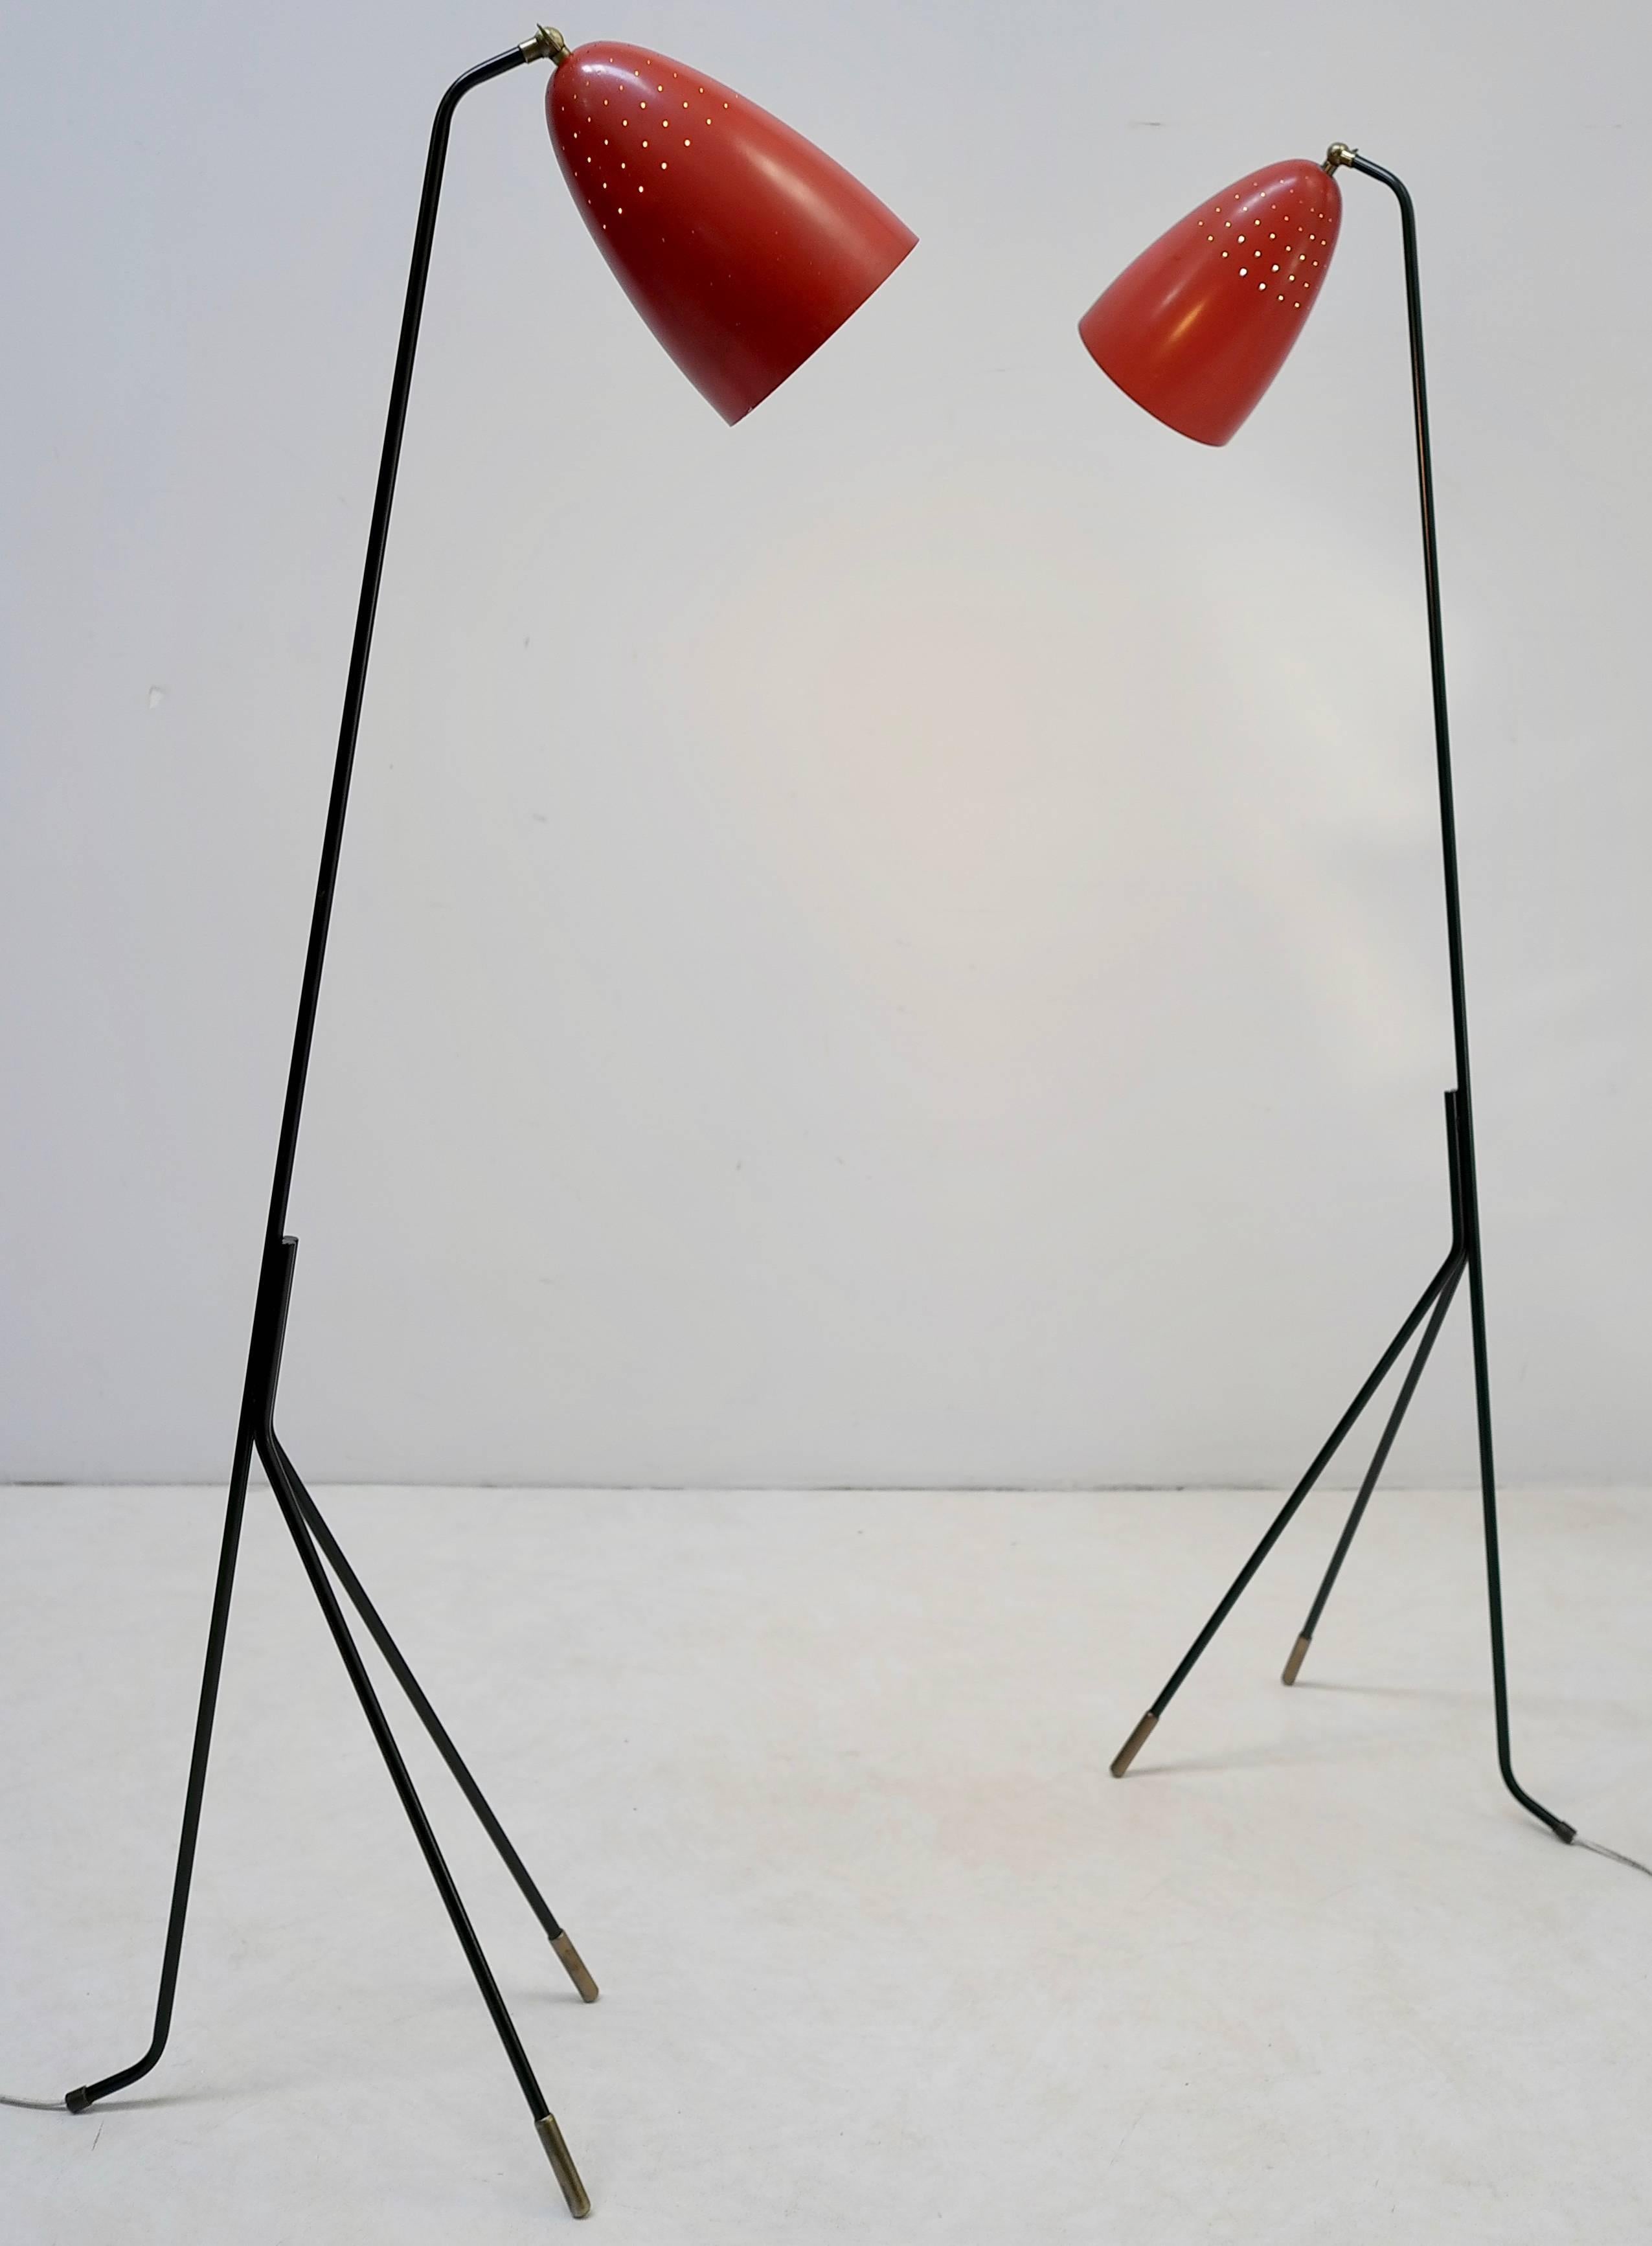 Red grasshopper floor lamp by Svend Aage Holm Sorensen, Denmark, 1950s.

Beautiful light shines through the many tiny holes in the red hoods. The ends from the metal bases are made from brass. We have two of these lamps available. 